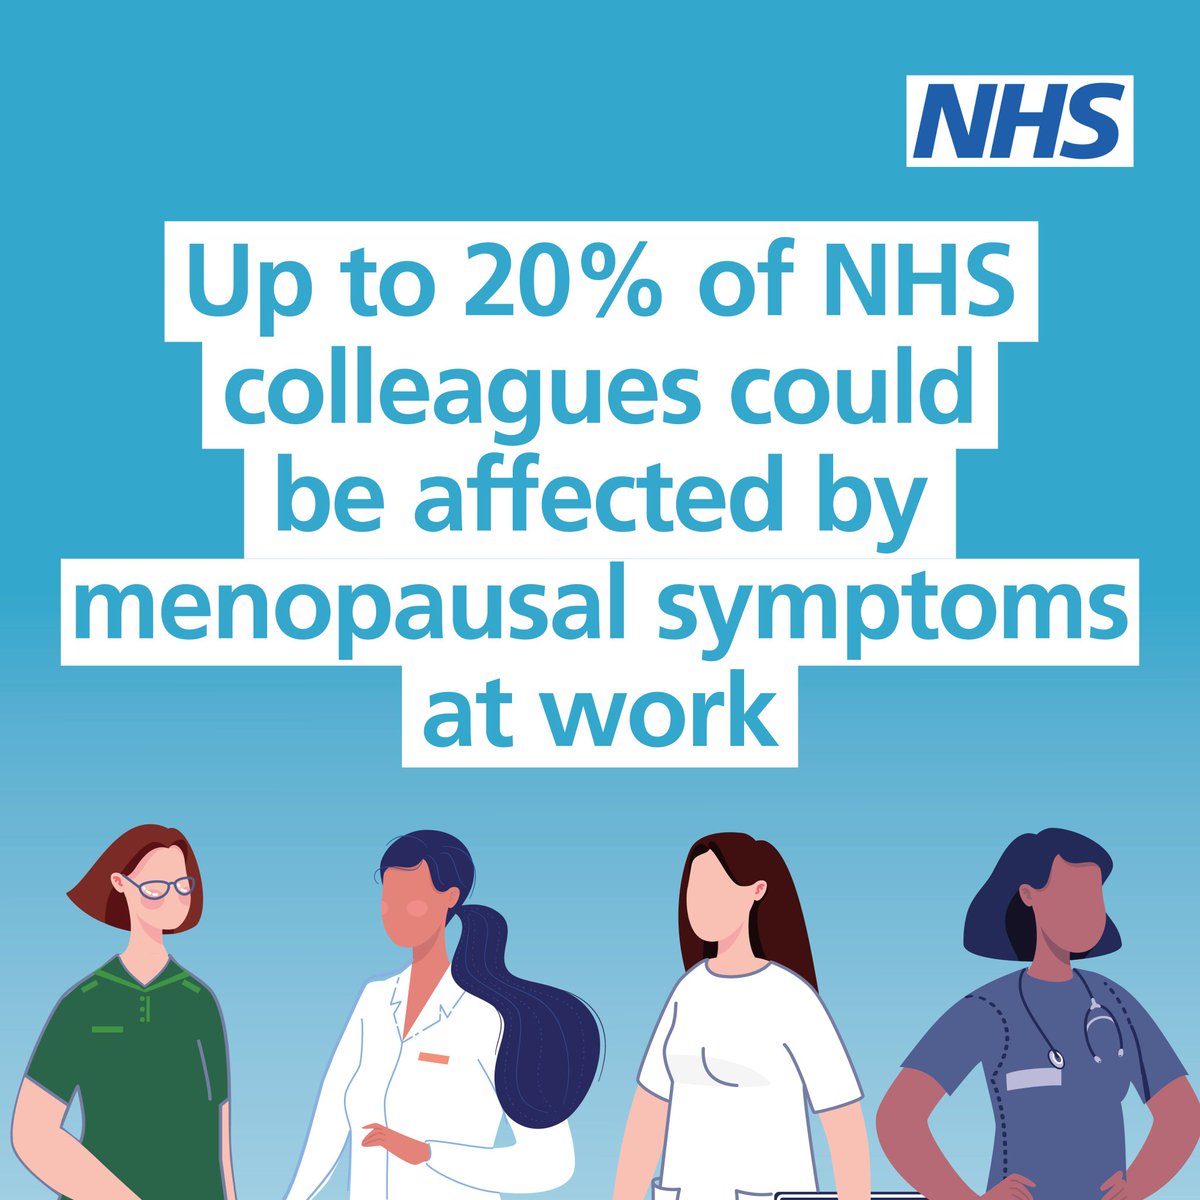 @UHNM_NHS colleagues 👇 tomorrow (19th) we host UHNM's drop-in Menopause Cafe ☕ Meet our professionals to talk about all things Menopause (bring your Q's, share experiences, receive support, advice & guidance). Captain Tom’s Cabin (behind A Block) TOMORROW morn 10am - 12noon 💚